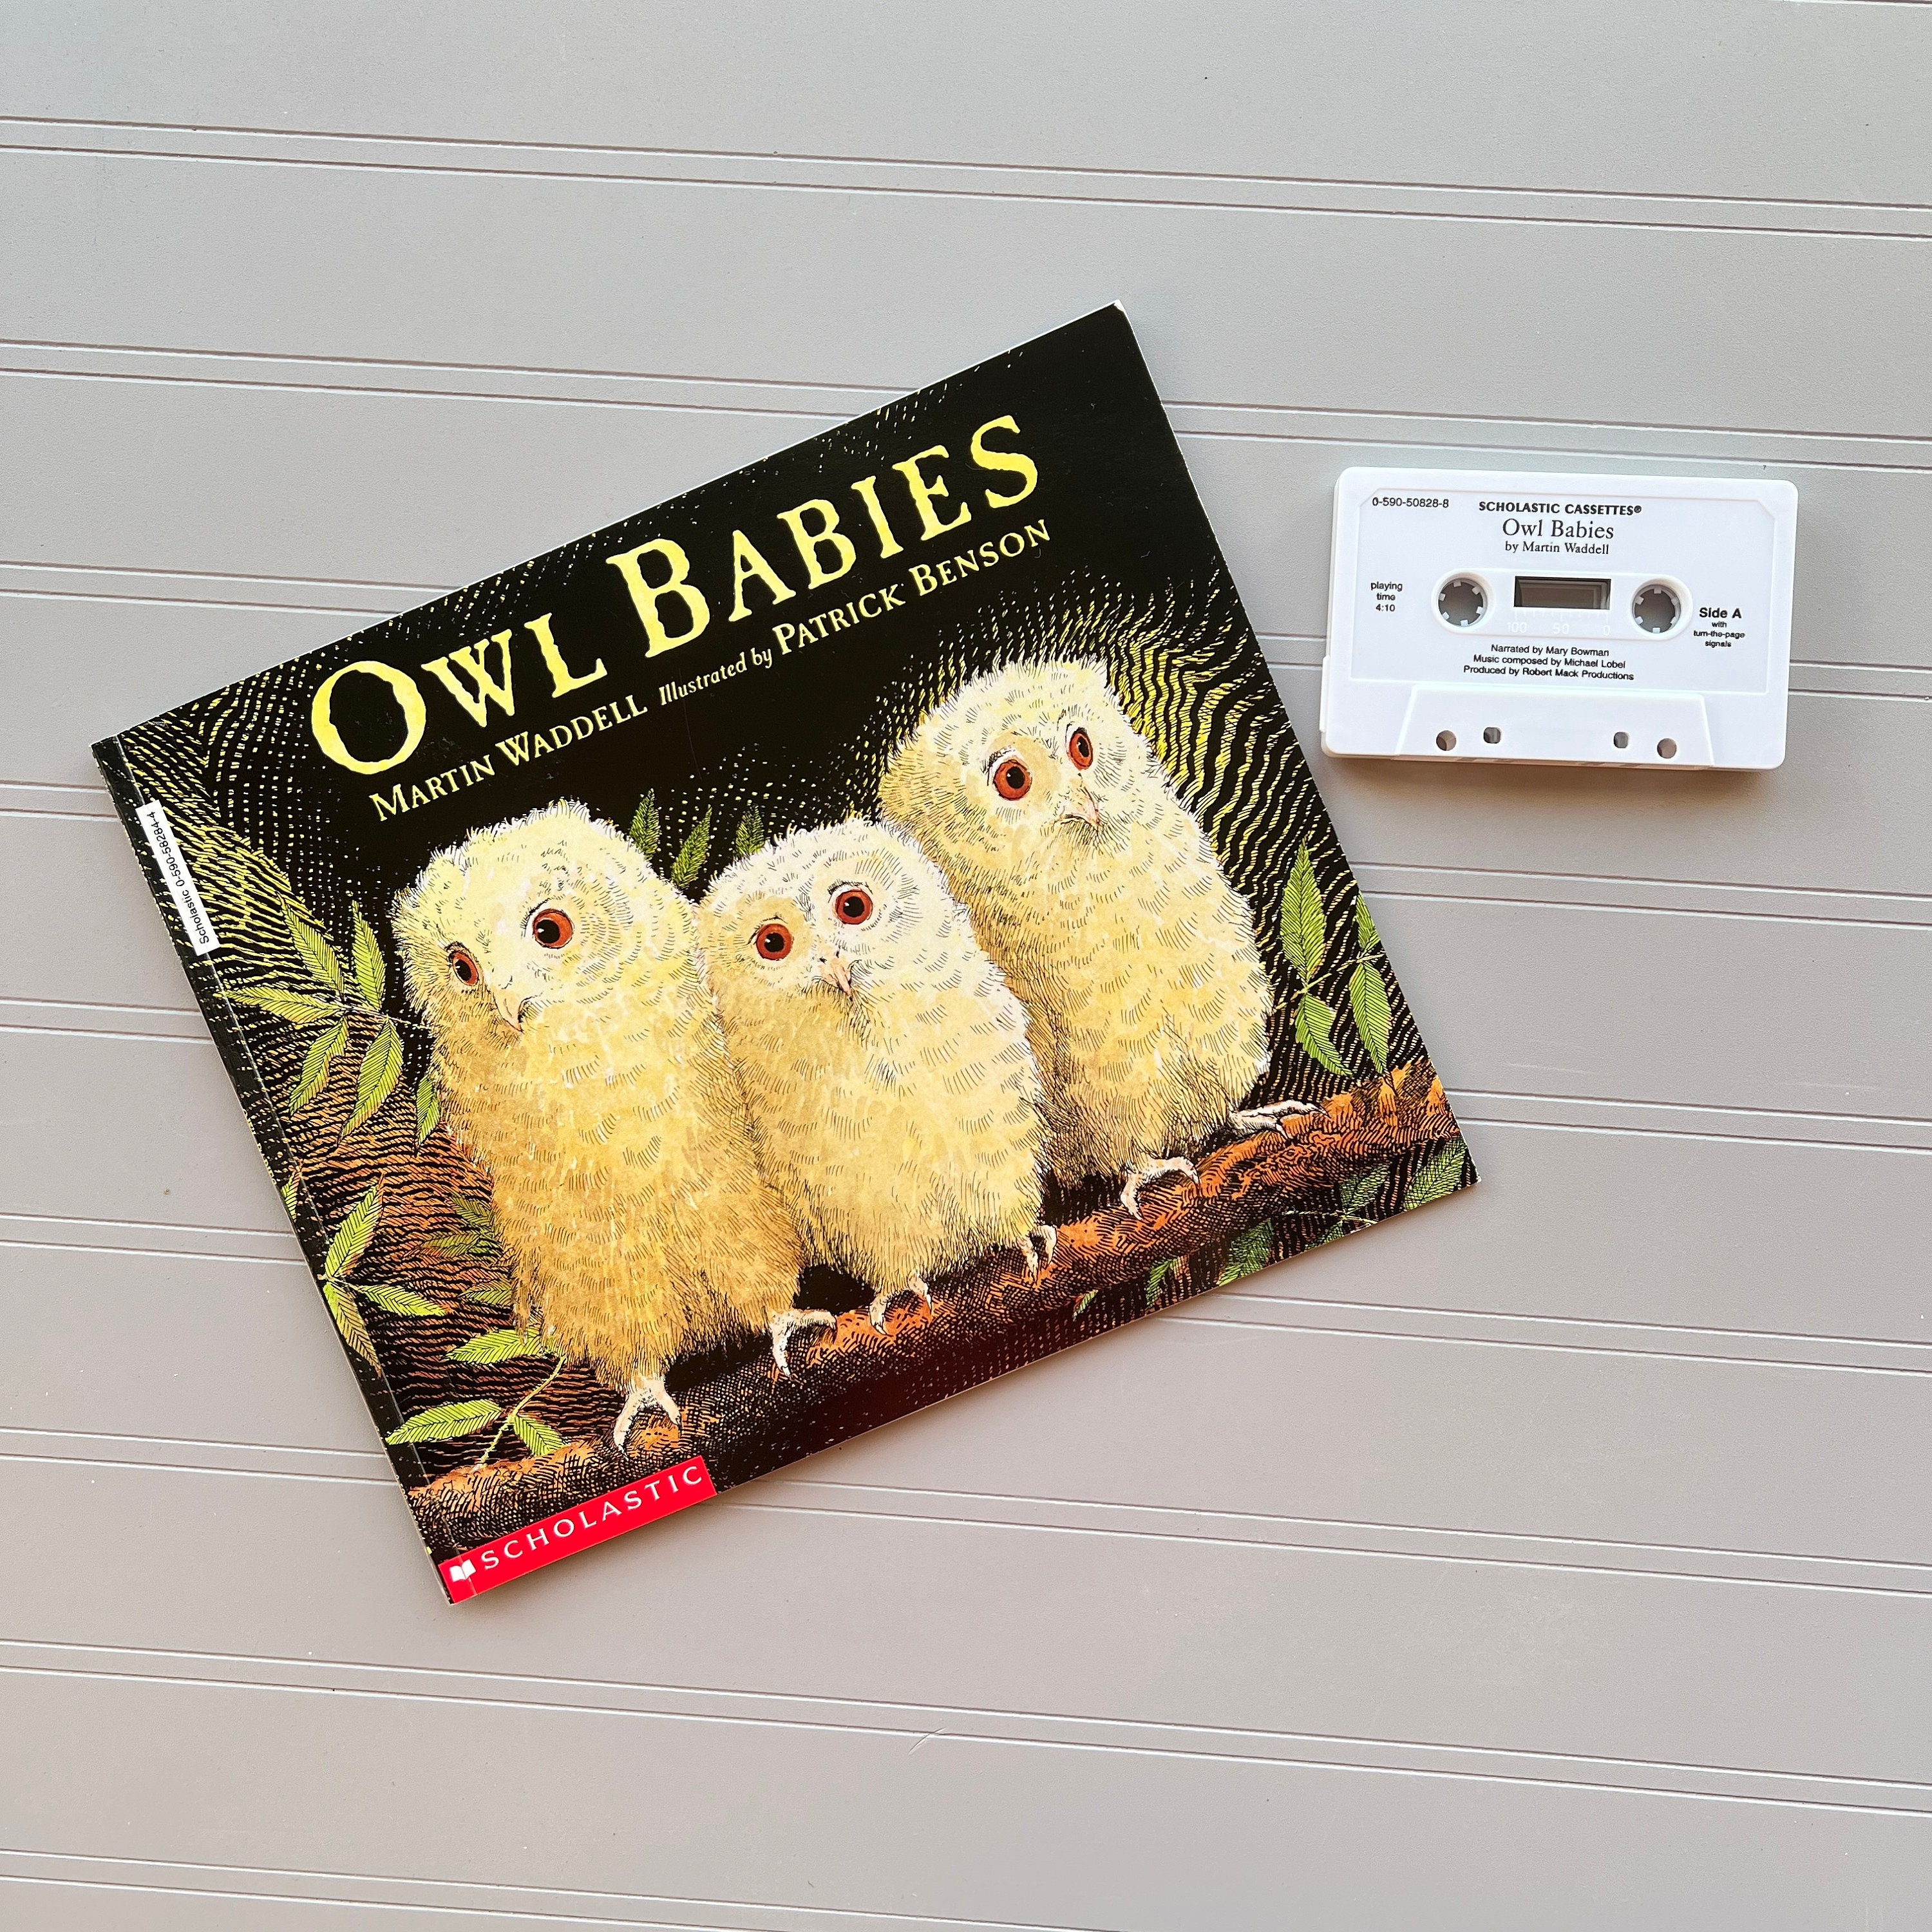 Owl Babies by Waddell, Martin (April 1, 2002) Paperback: Martin